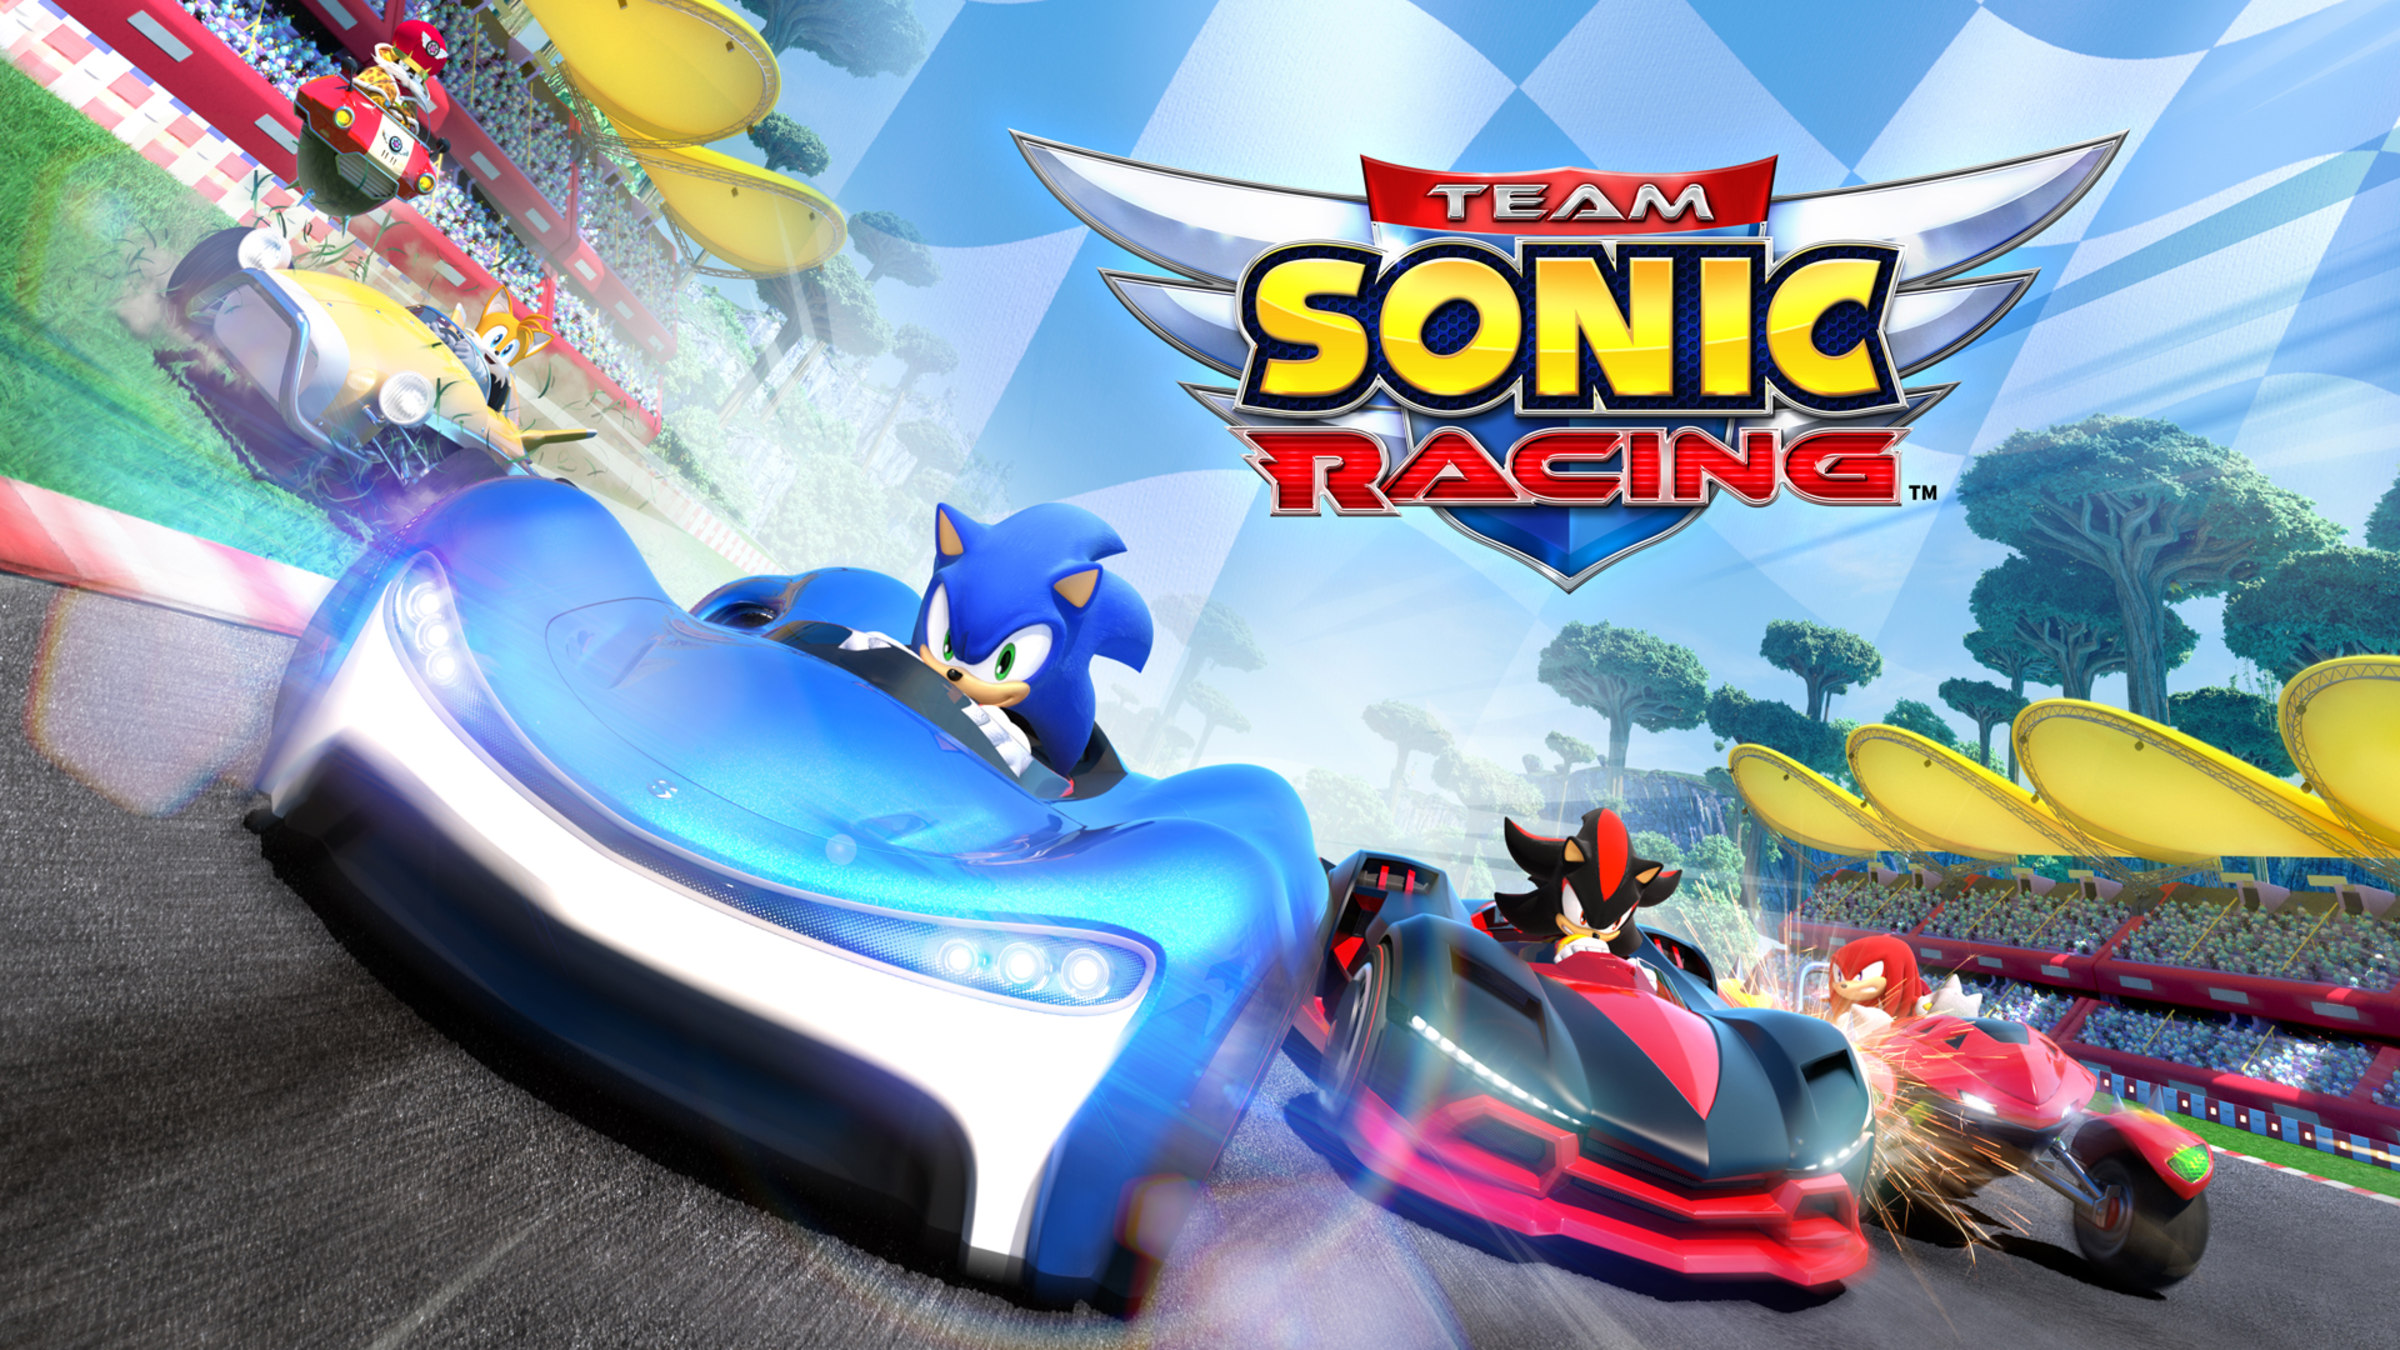 Team Sonic Racing for Nintendo Switch - Nintendo Official Site